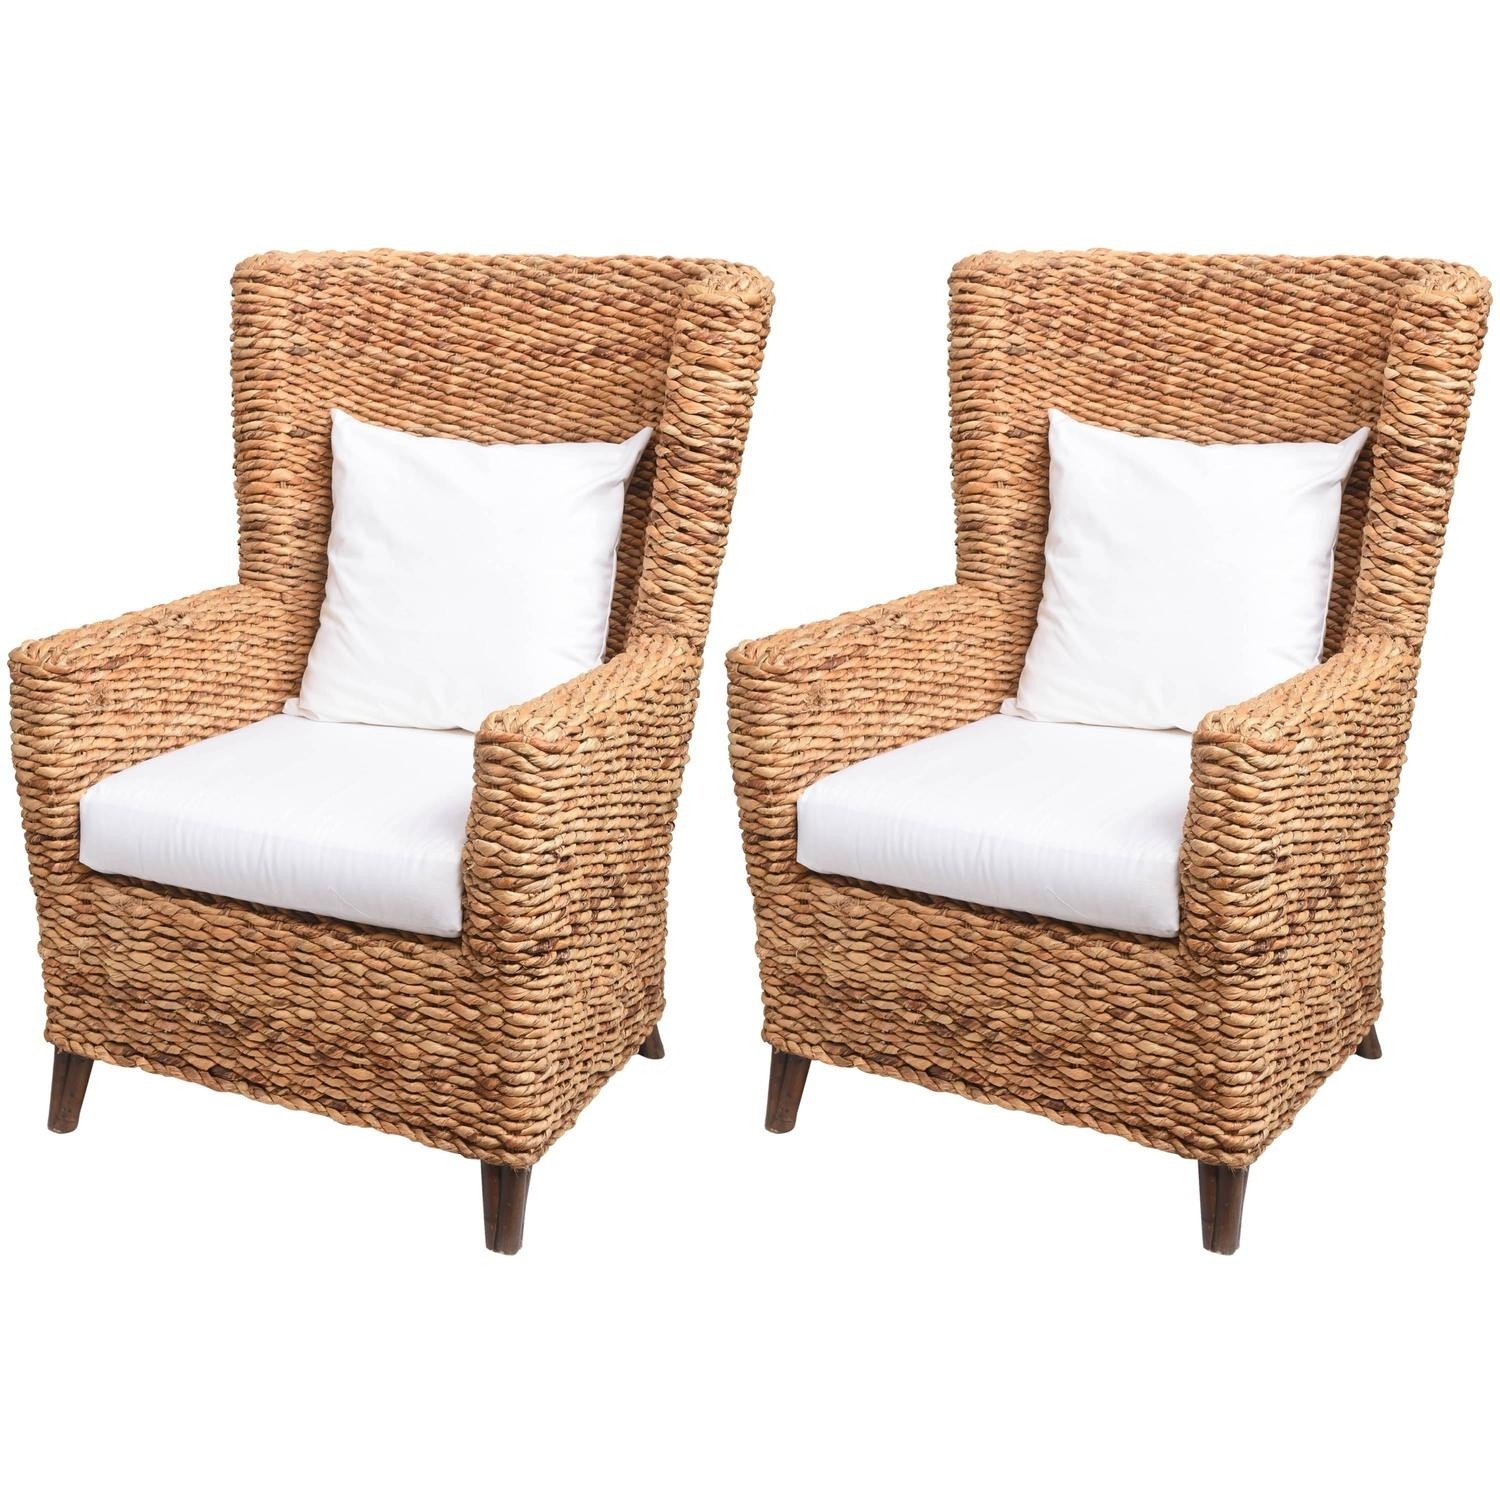 Pair of large woven banana leaf wing chairs at 1stdibs